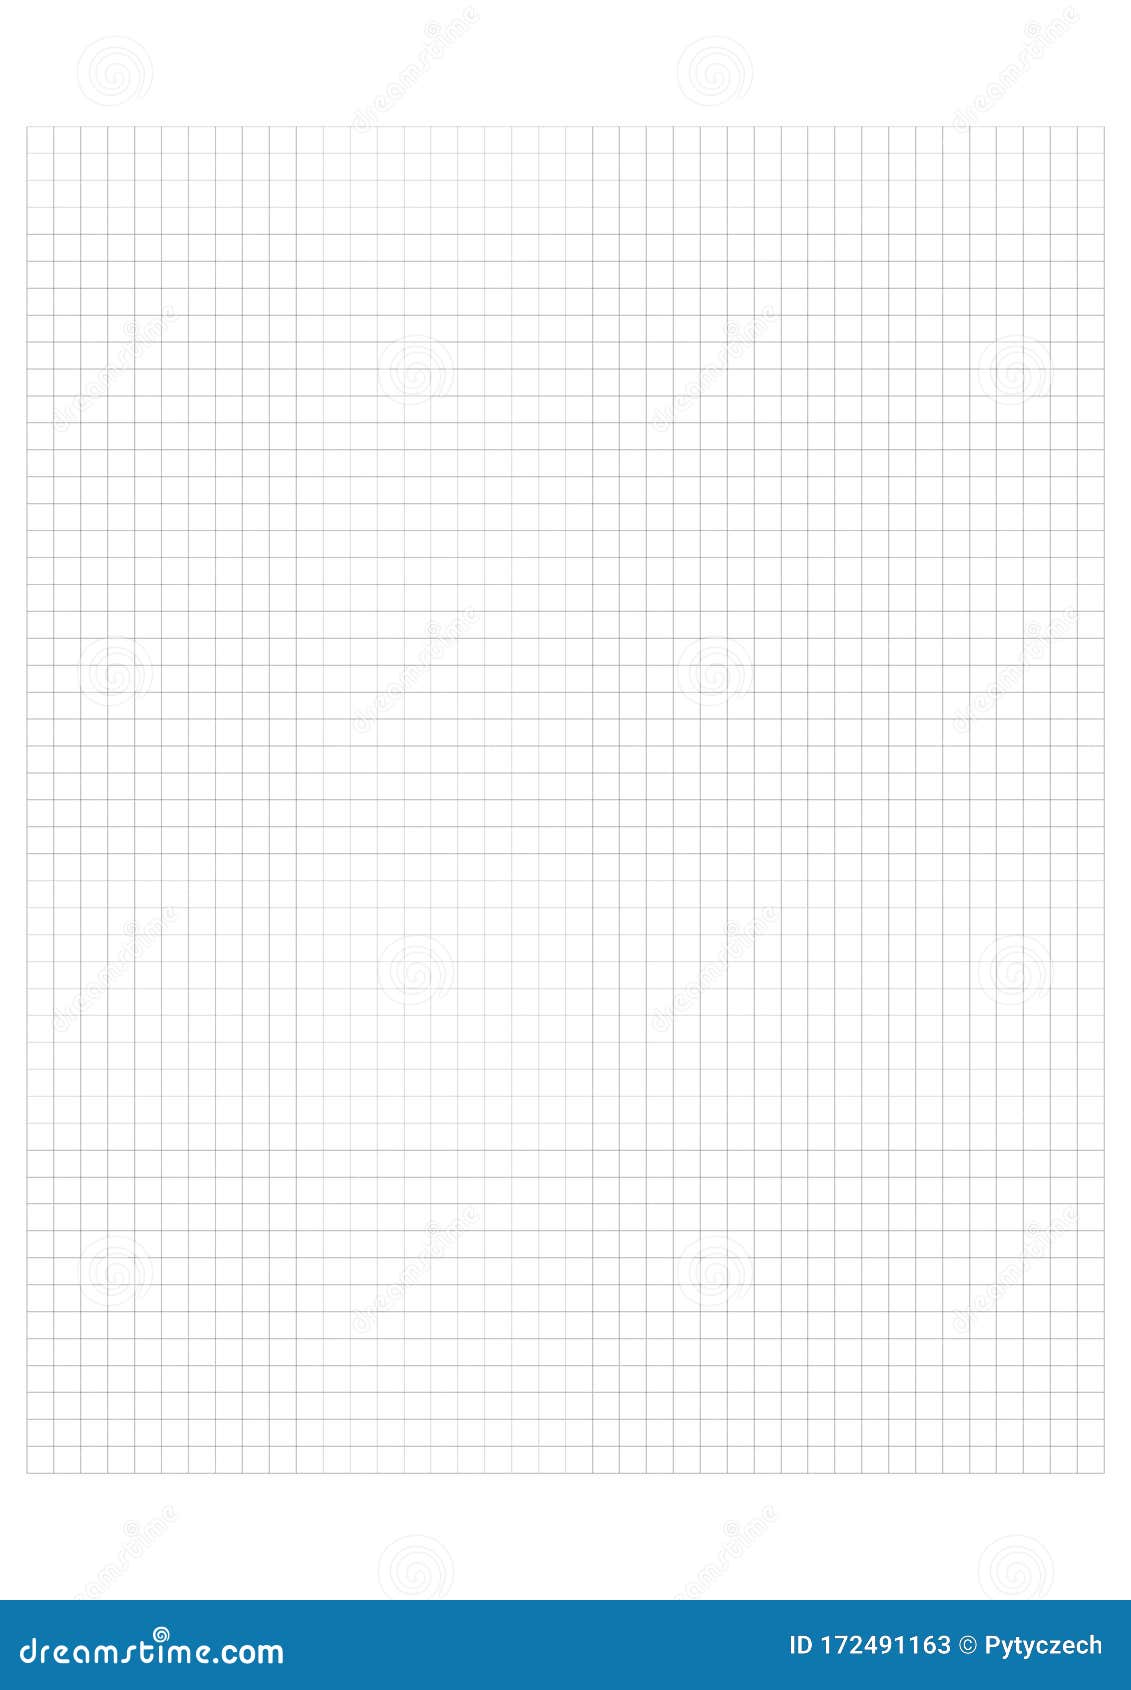 millimeter grid on a4 size page divided by 5 mm lines sheet of engineering graph paper stock vector illustration of drawing geometric 172491163